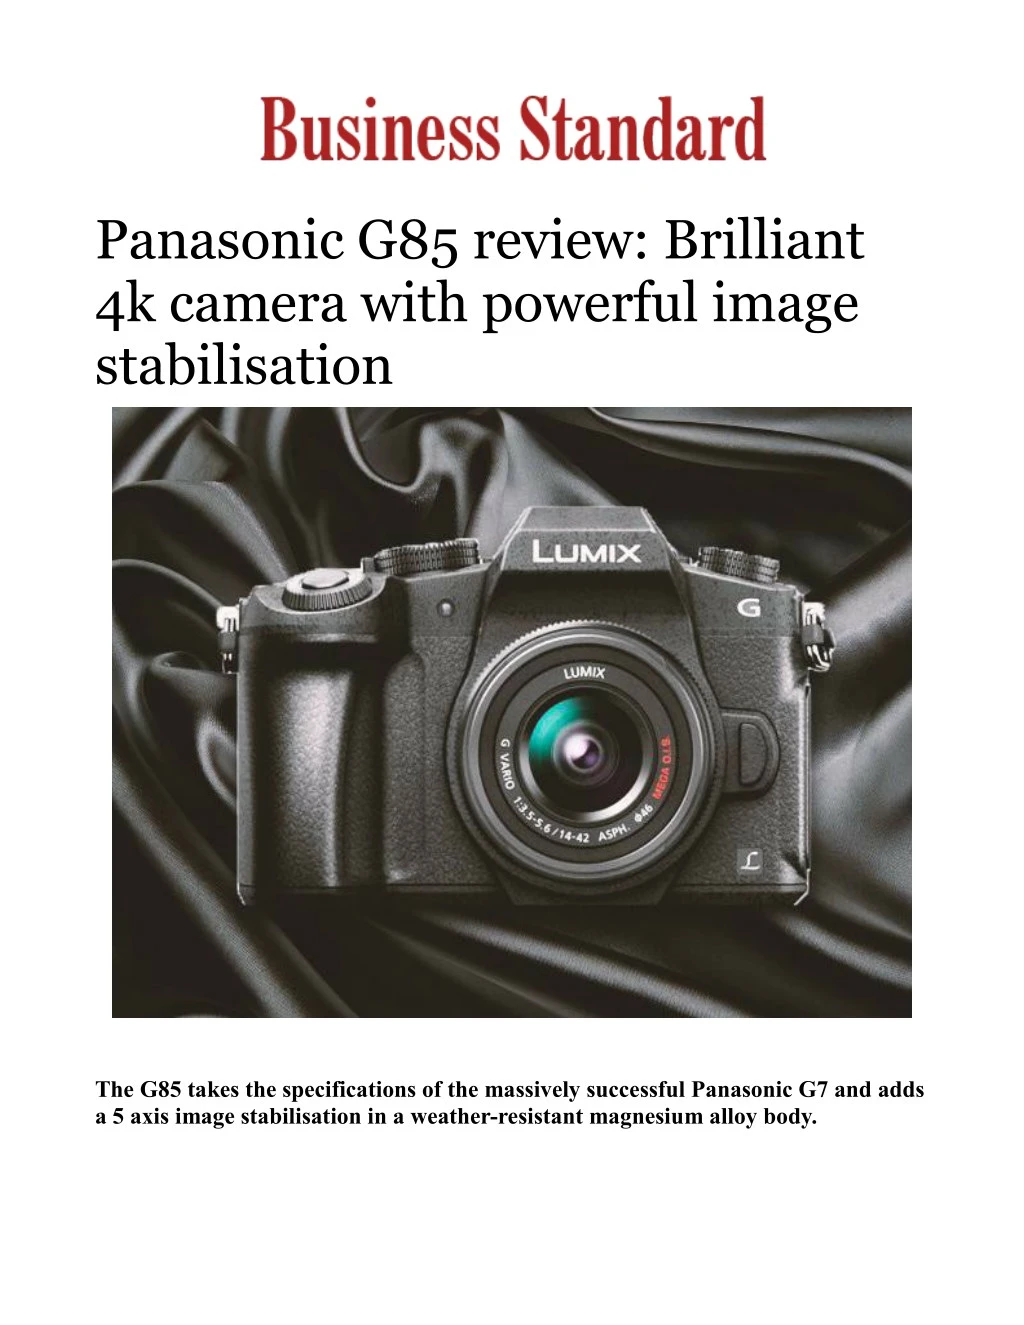 panasonic g85 review brilliant 4k camera with